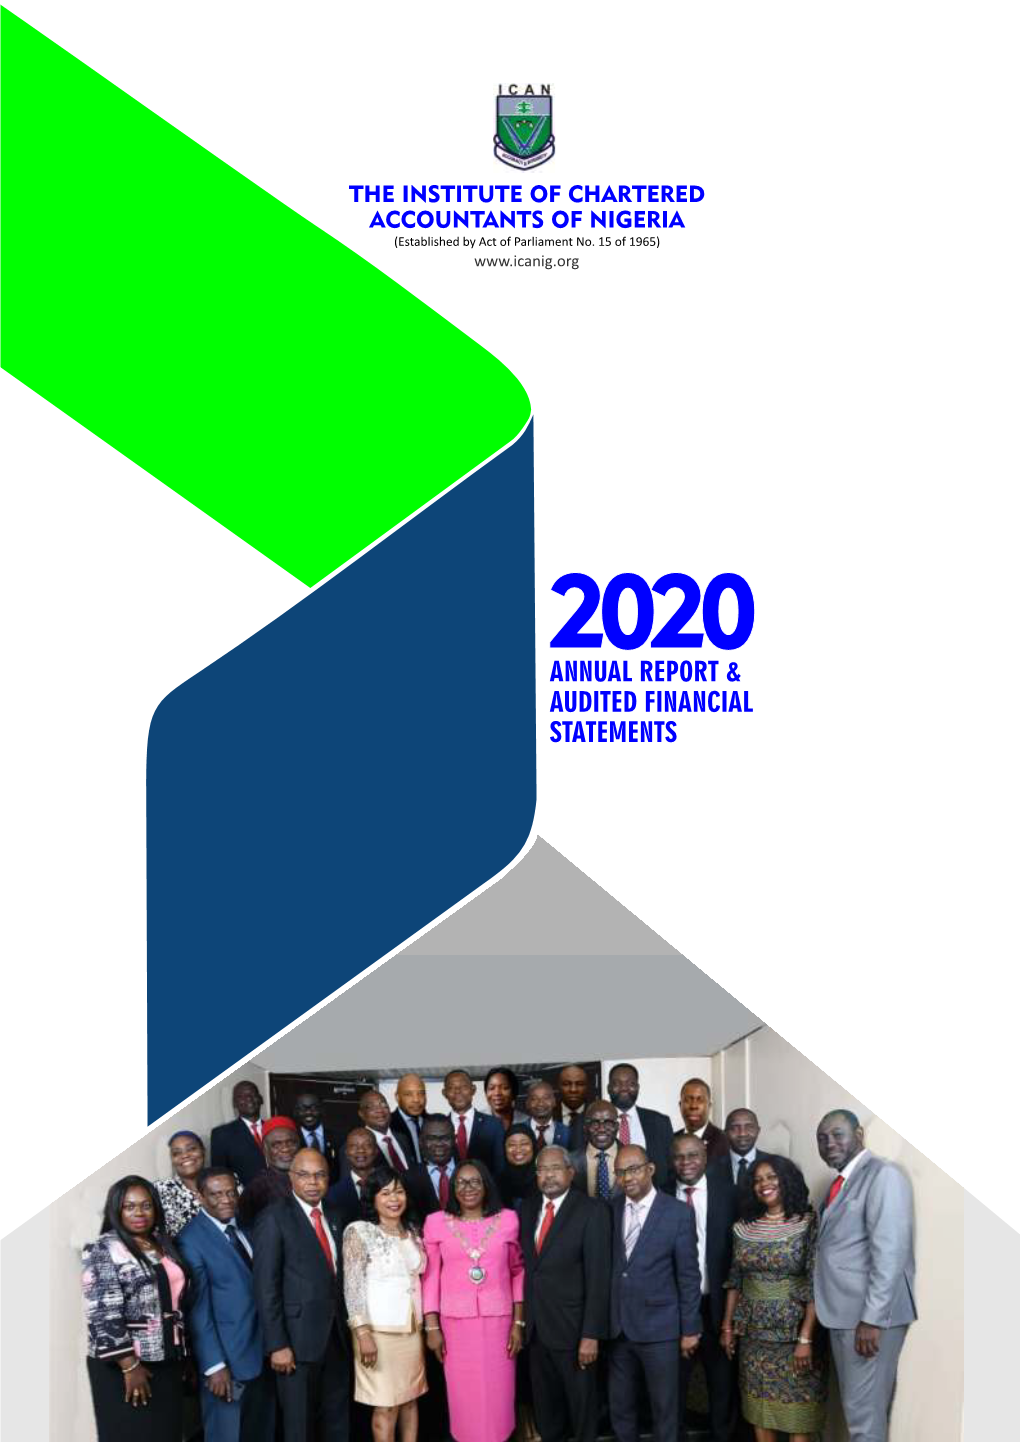 2020 Annual Report & Audited Financial Statements